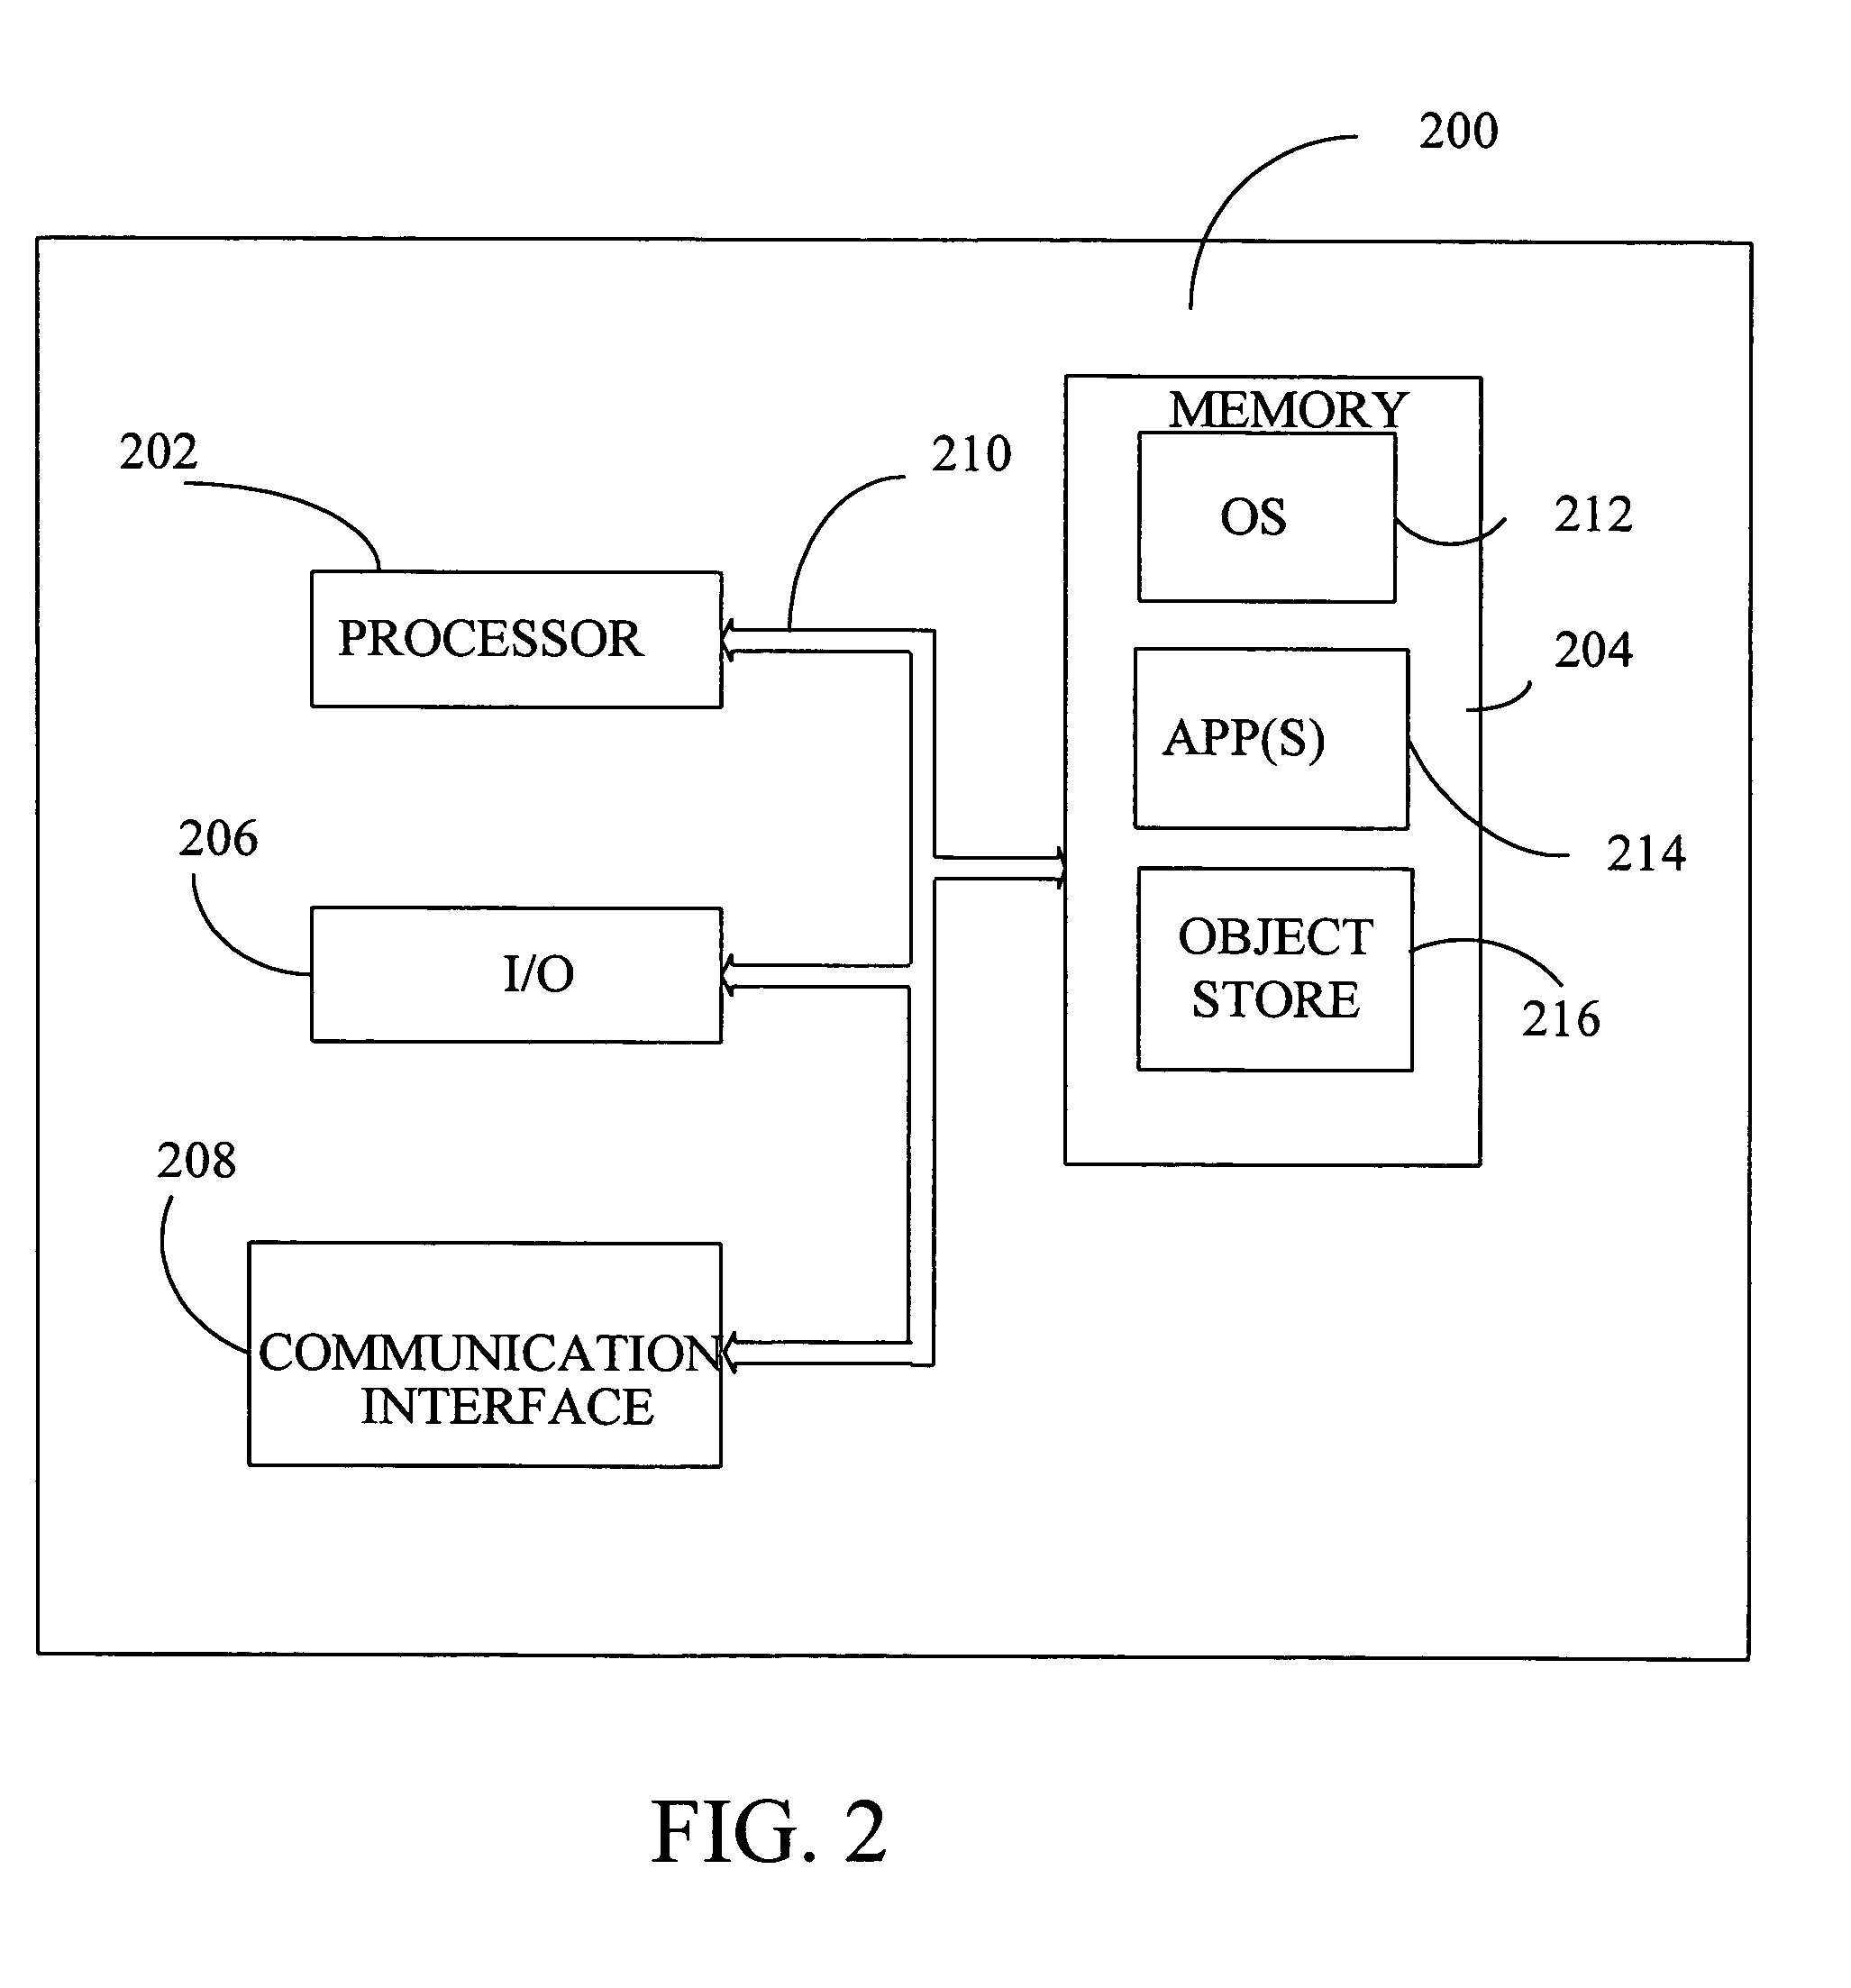 Method and apparatus for deriving logical relations from linguistic relations with multiple relevance ranking strategies for information retrieval